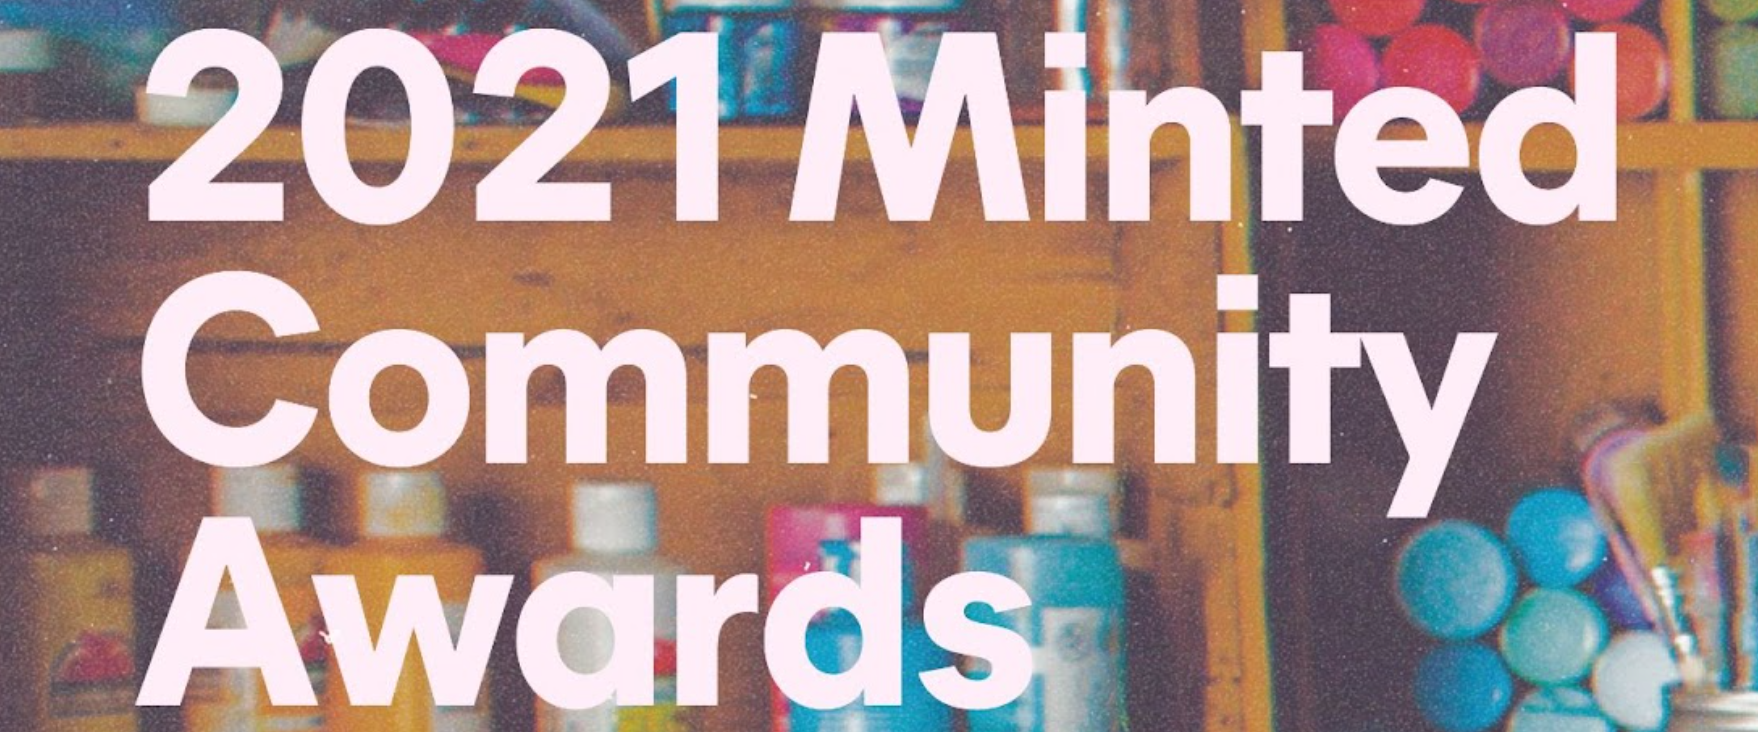 Announcing the winners of the 2021 Minted Community Awards!